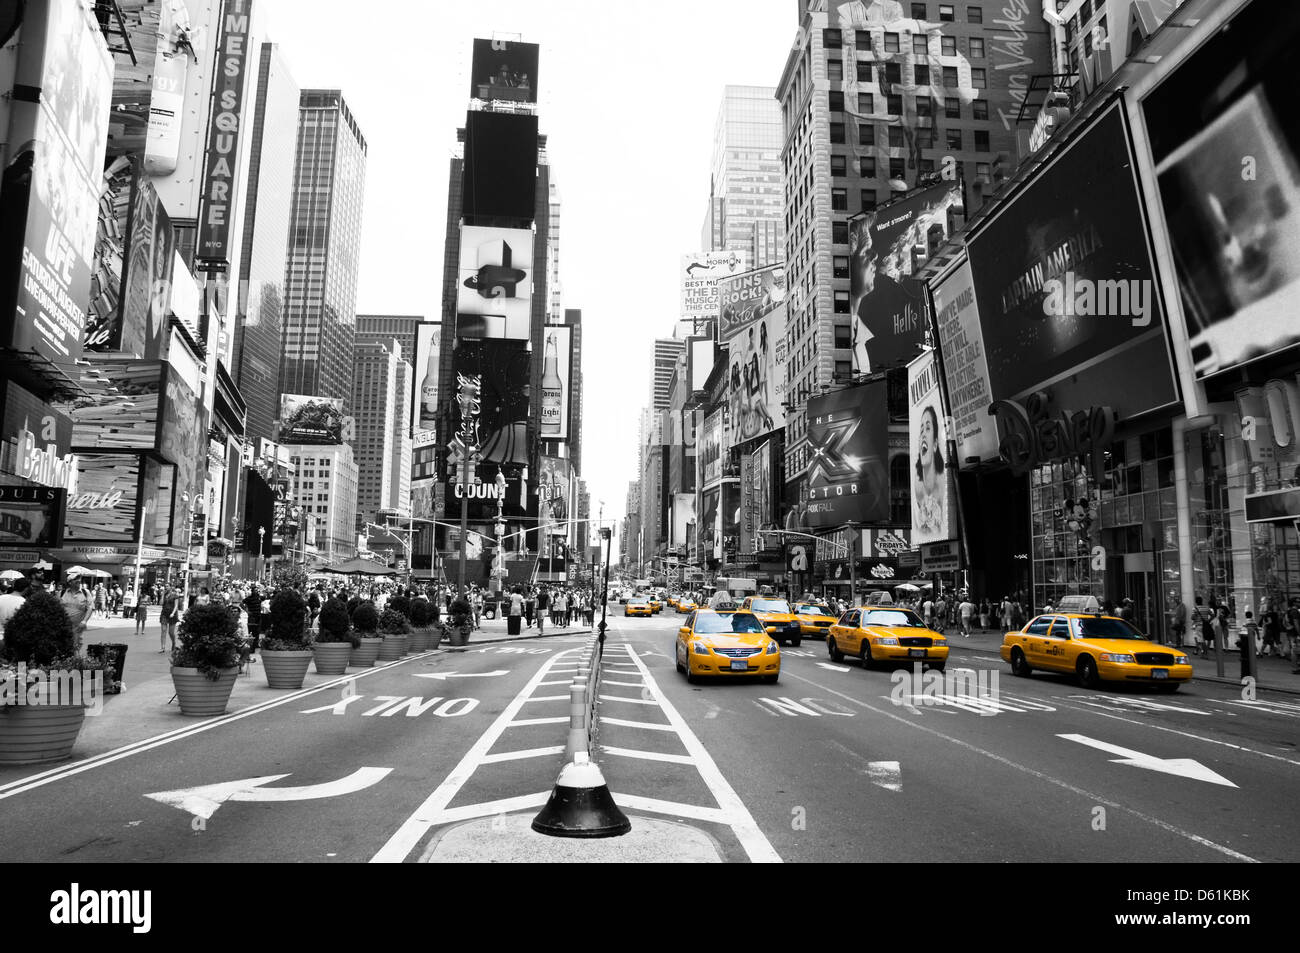 Yellow Cabs in Times Square New York City, USA Stock Photo